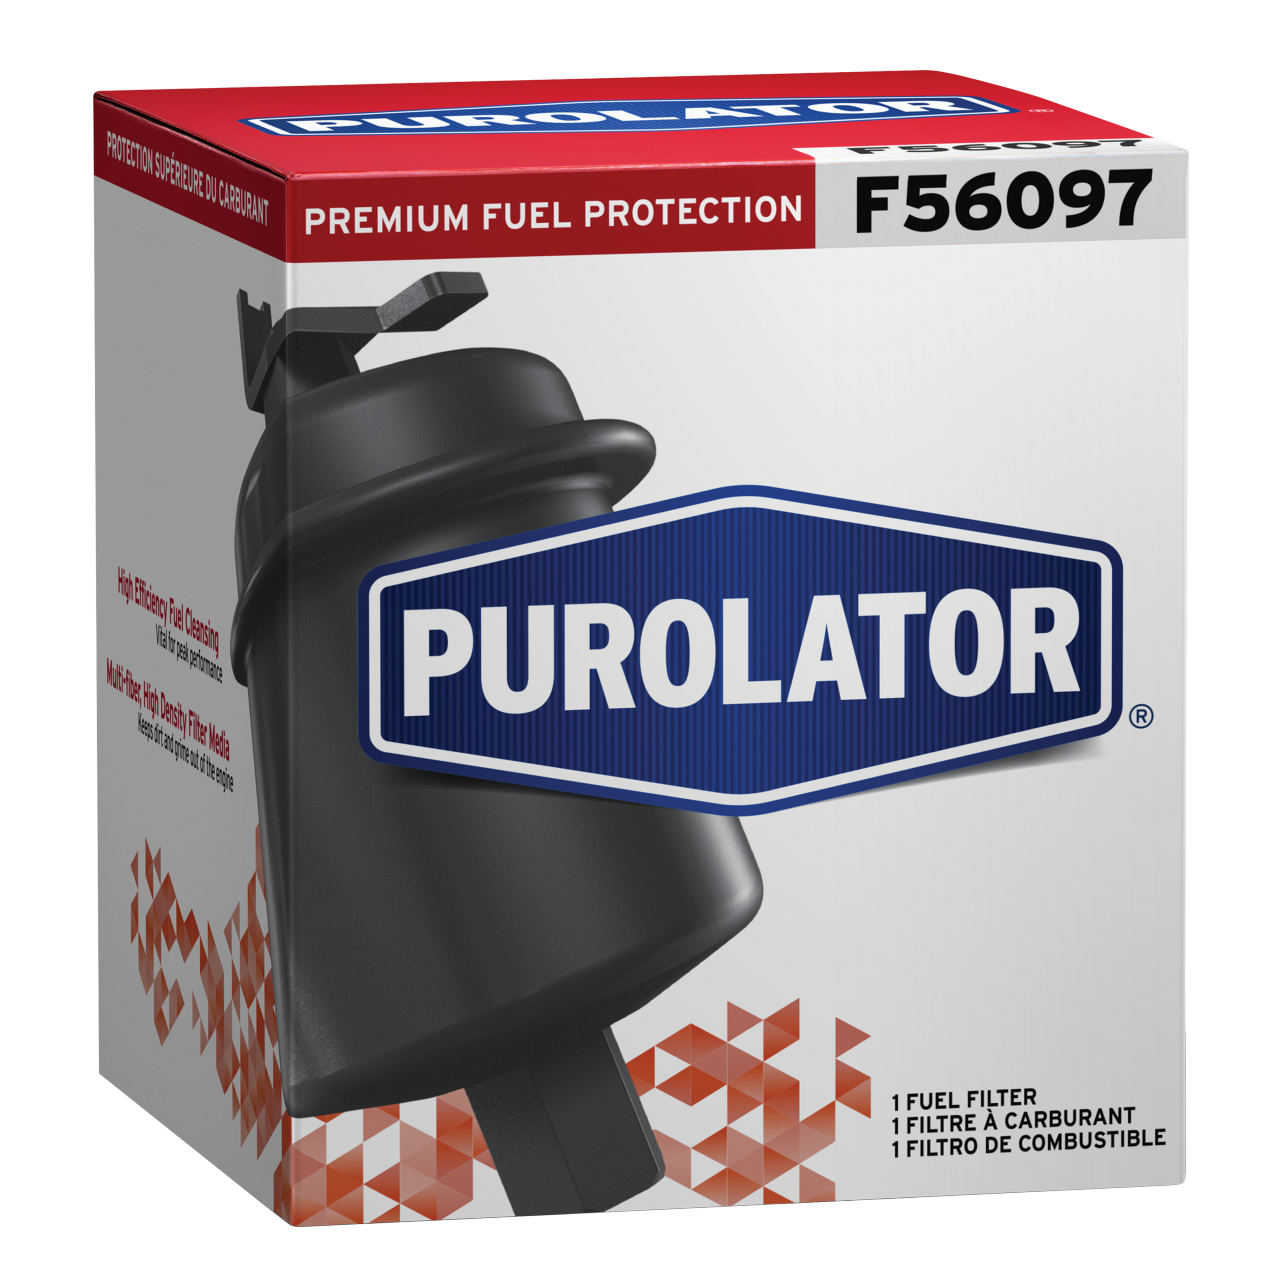 Protect fuel pumps and fuel injectors from costly engine issues by changing your gas filter to a Purolator fuel filter replacement.